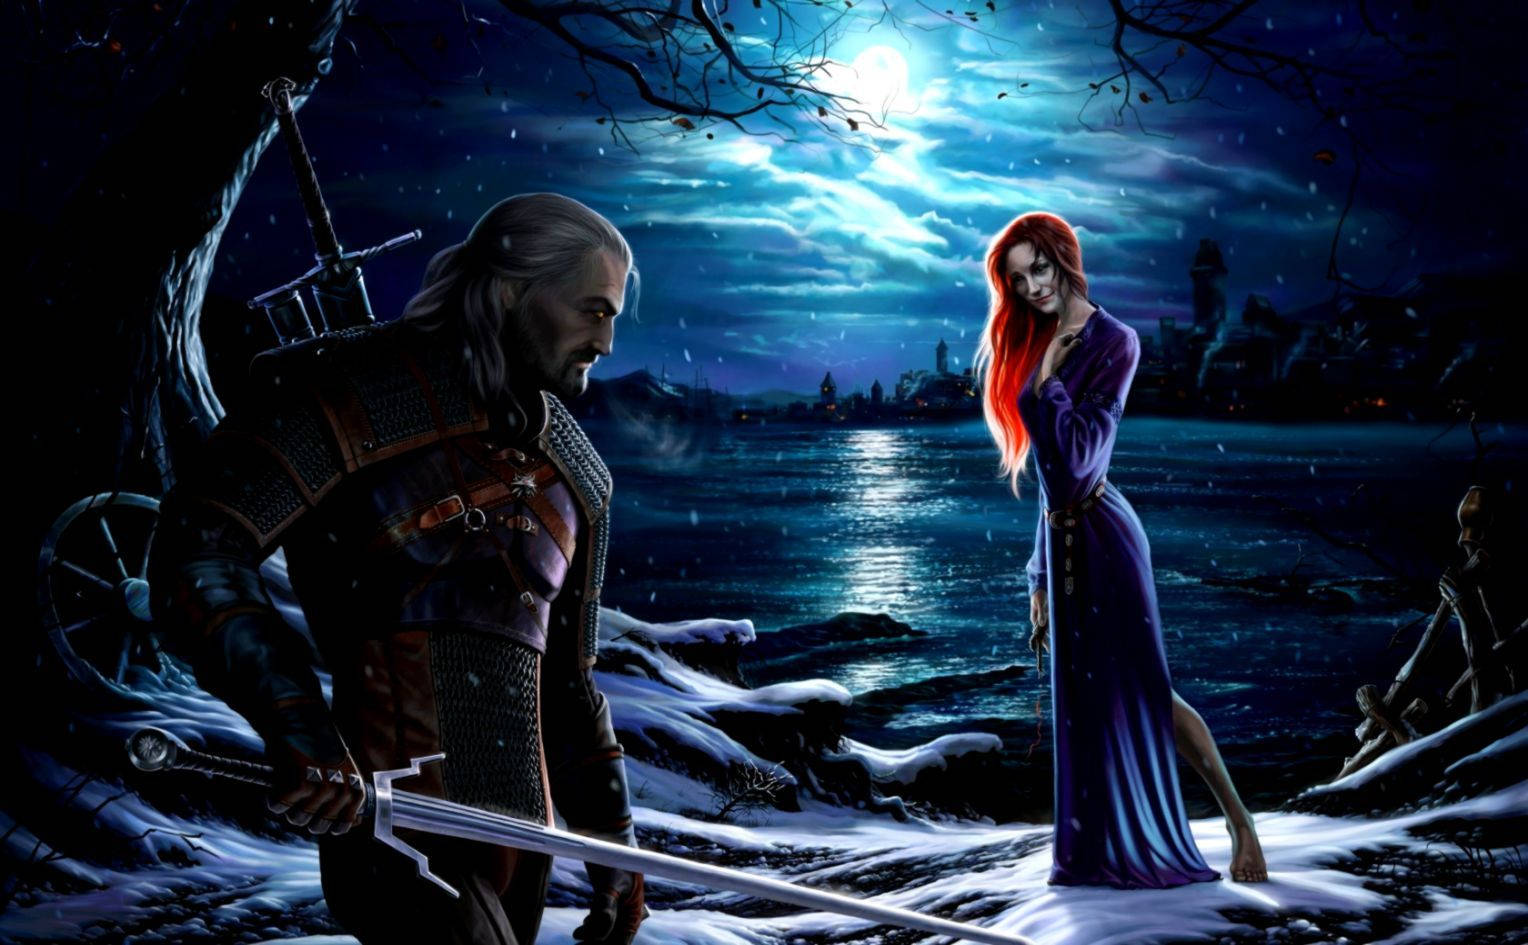 Gerelt and Bruxa of The Witcher Wallpaper